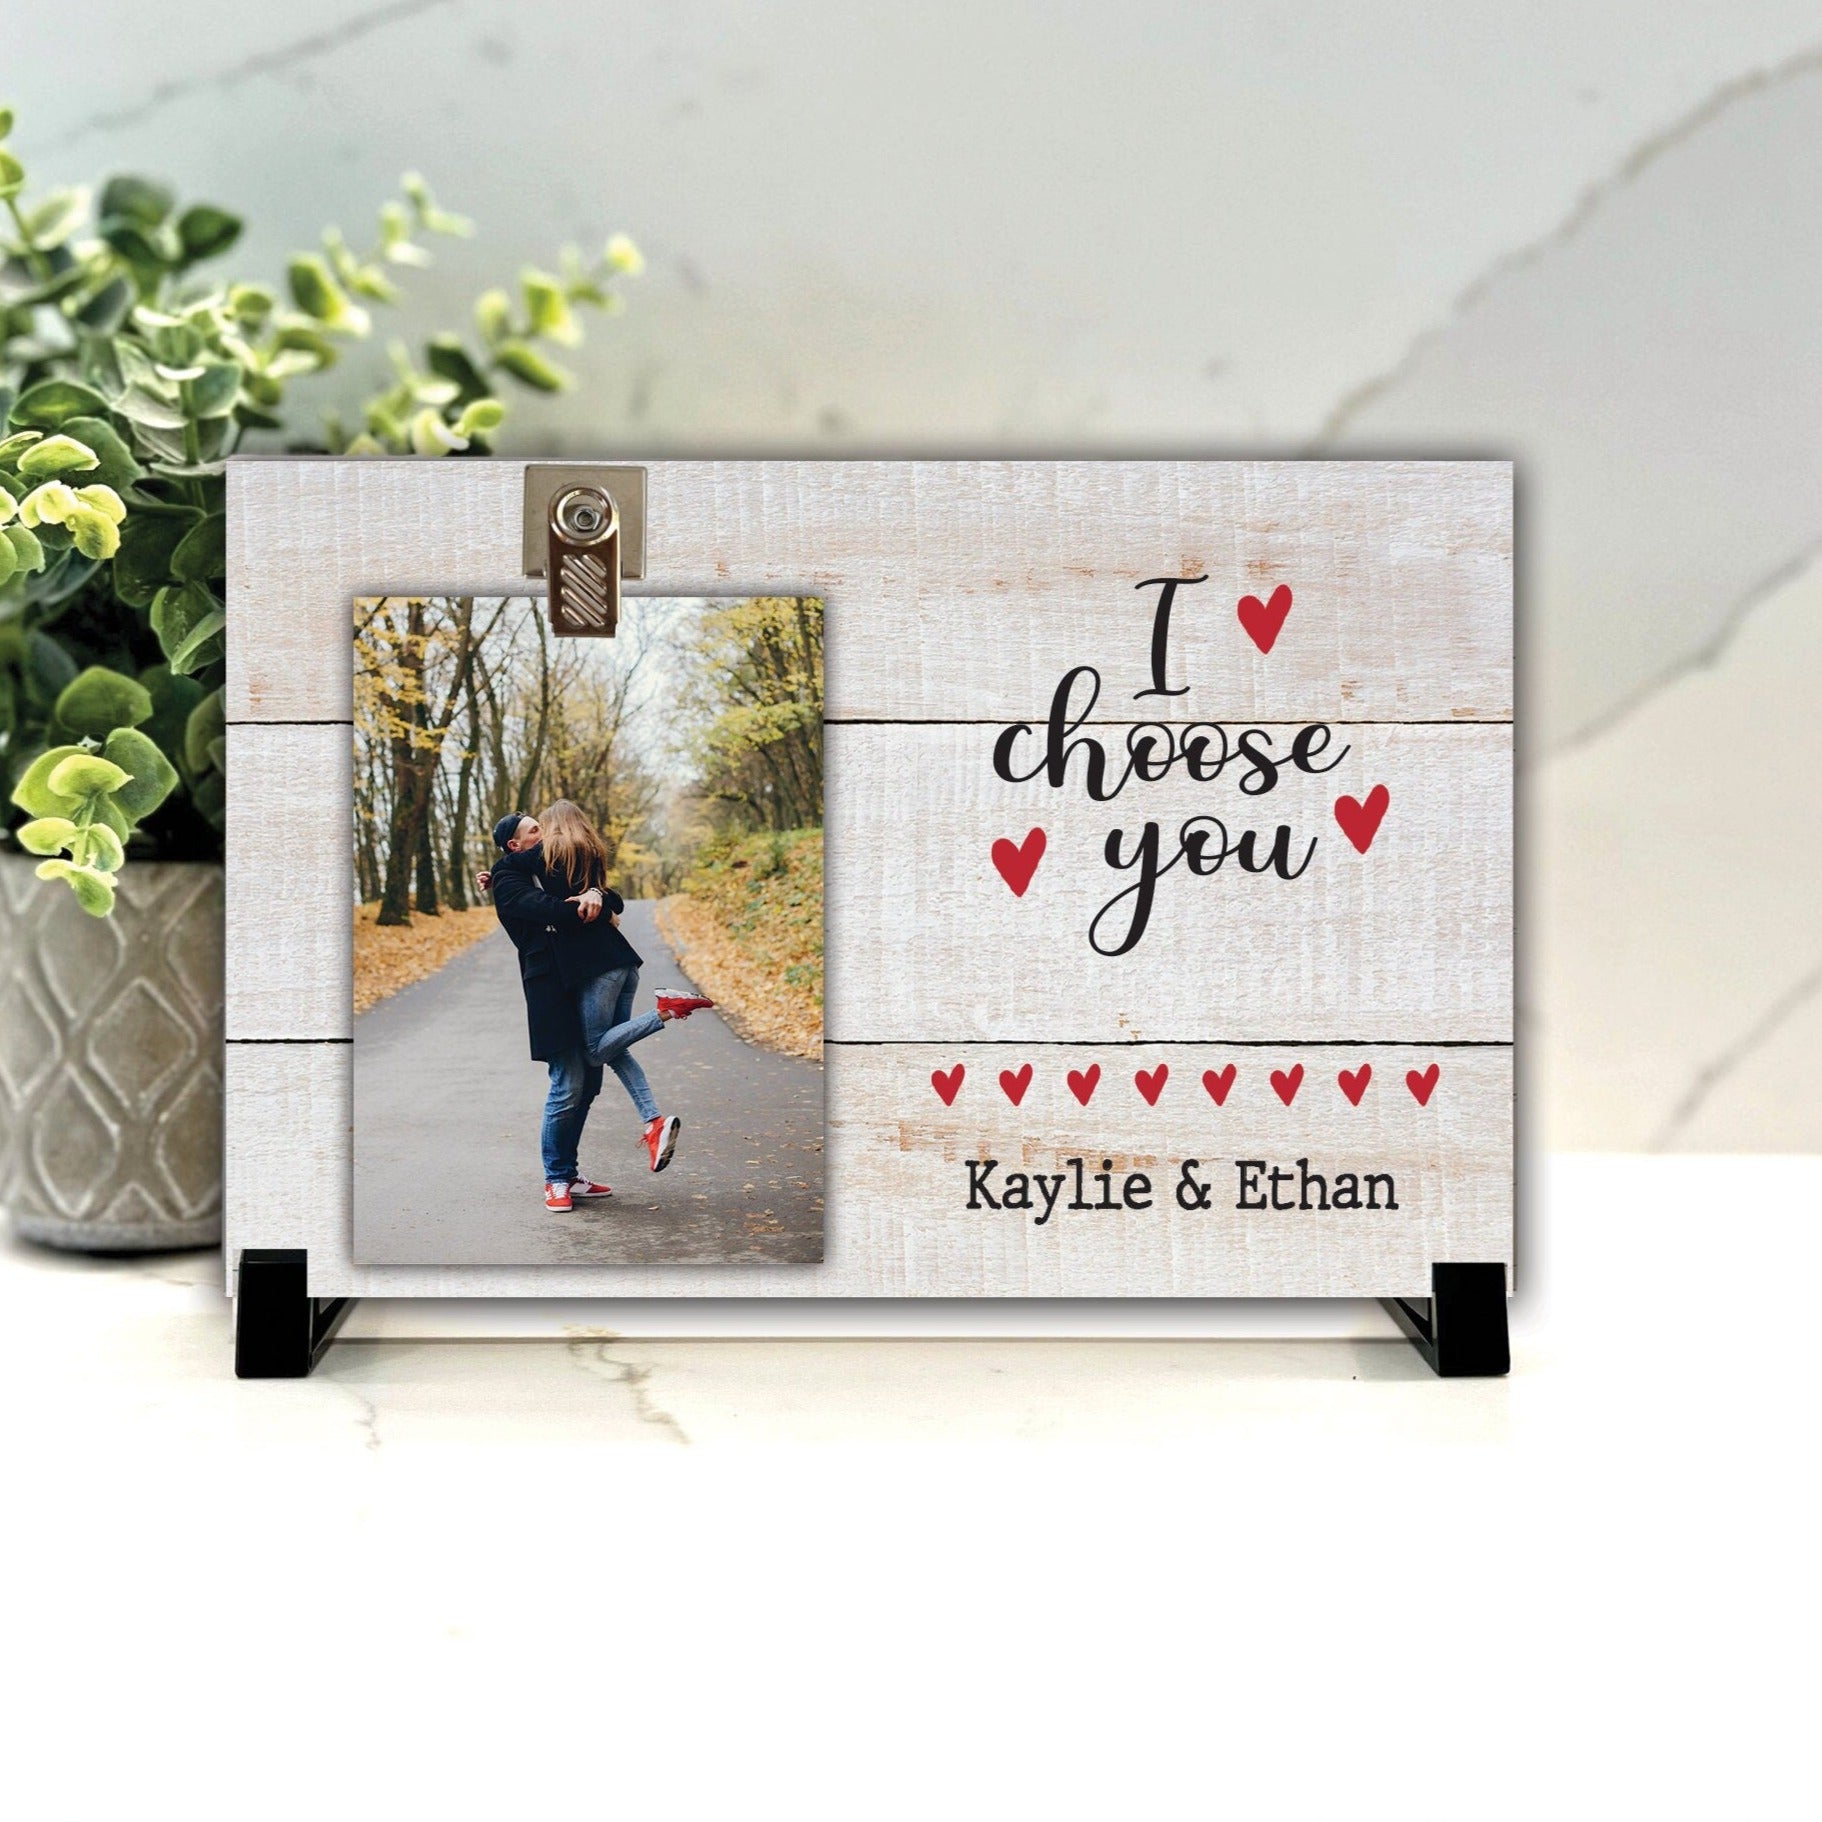 I Choose You Valentines Gift Frame Personalized with couple's name - Gifts for husband, wife, girlfriend, boyfriend, spouse, fiance